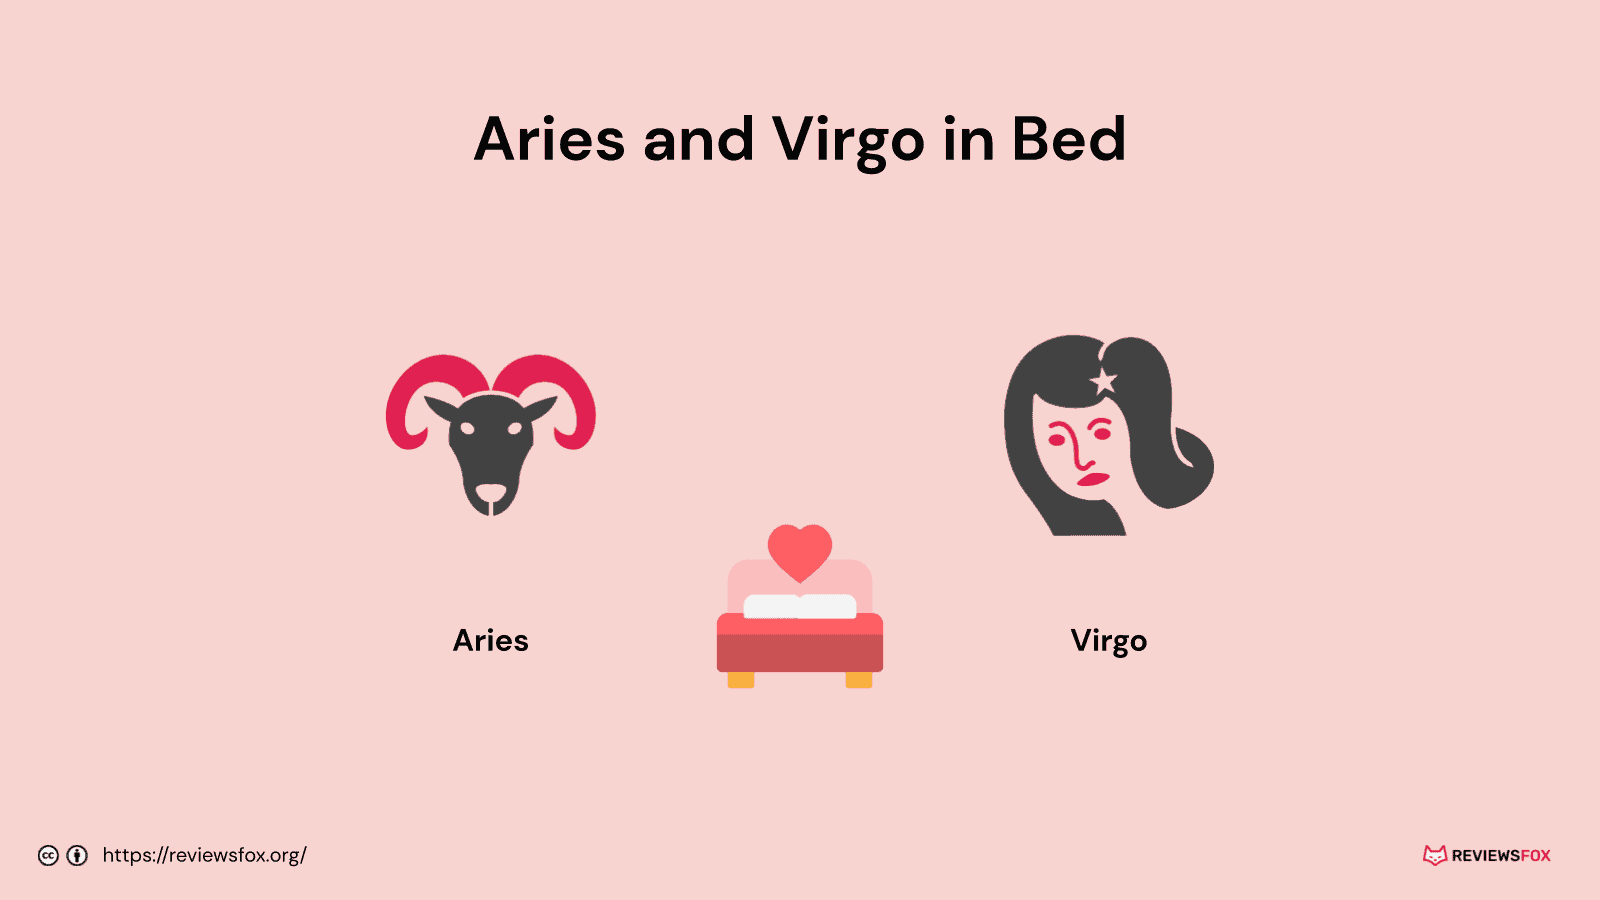 Aries and Virgo in bed